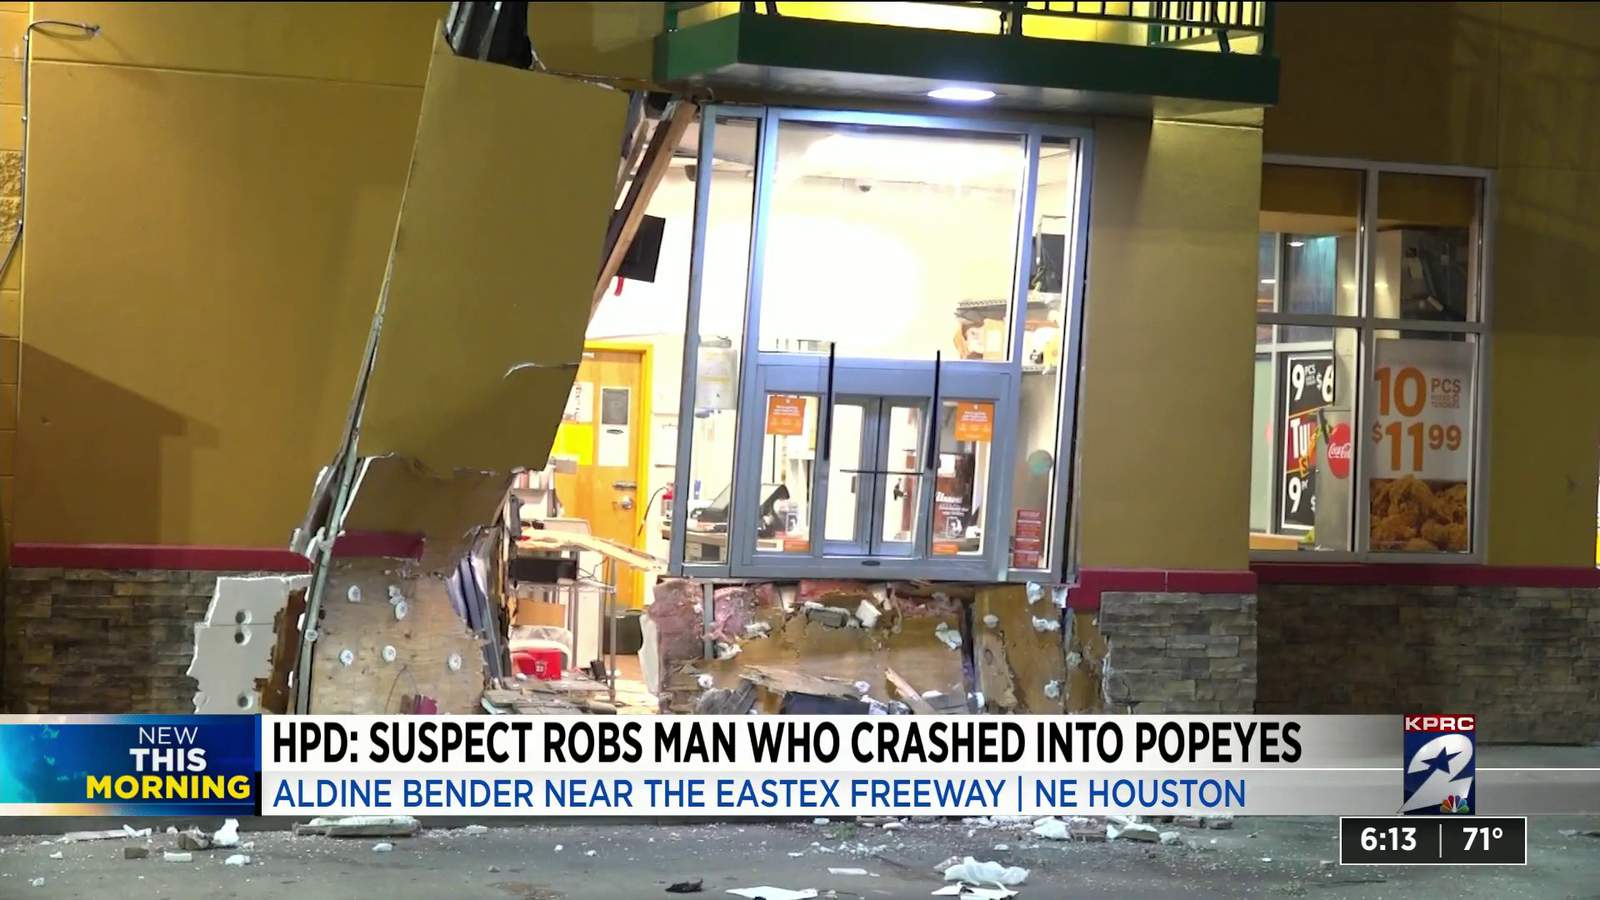 Suspect robs man who crashed into Popeyes in NE Houston: HPD